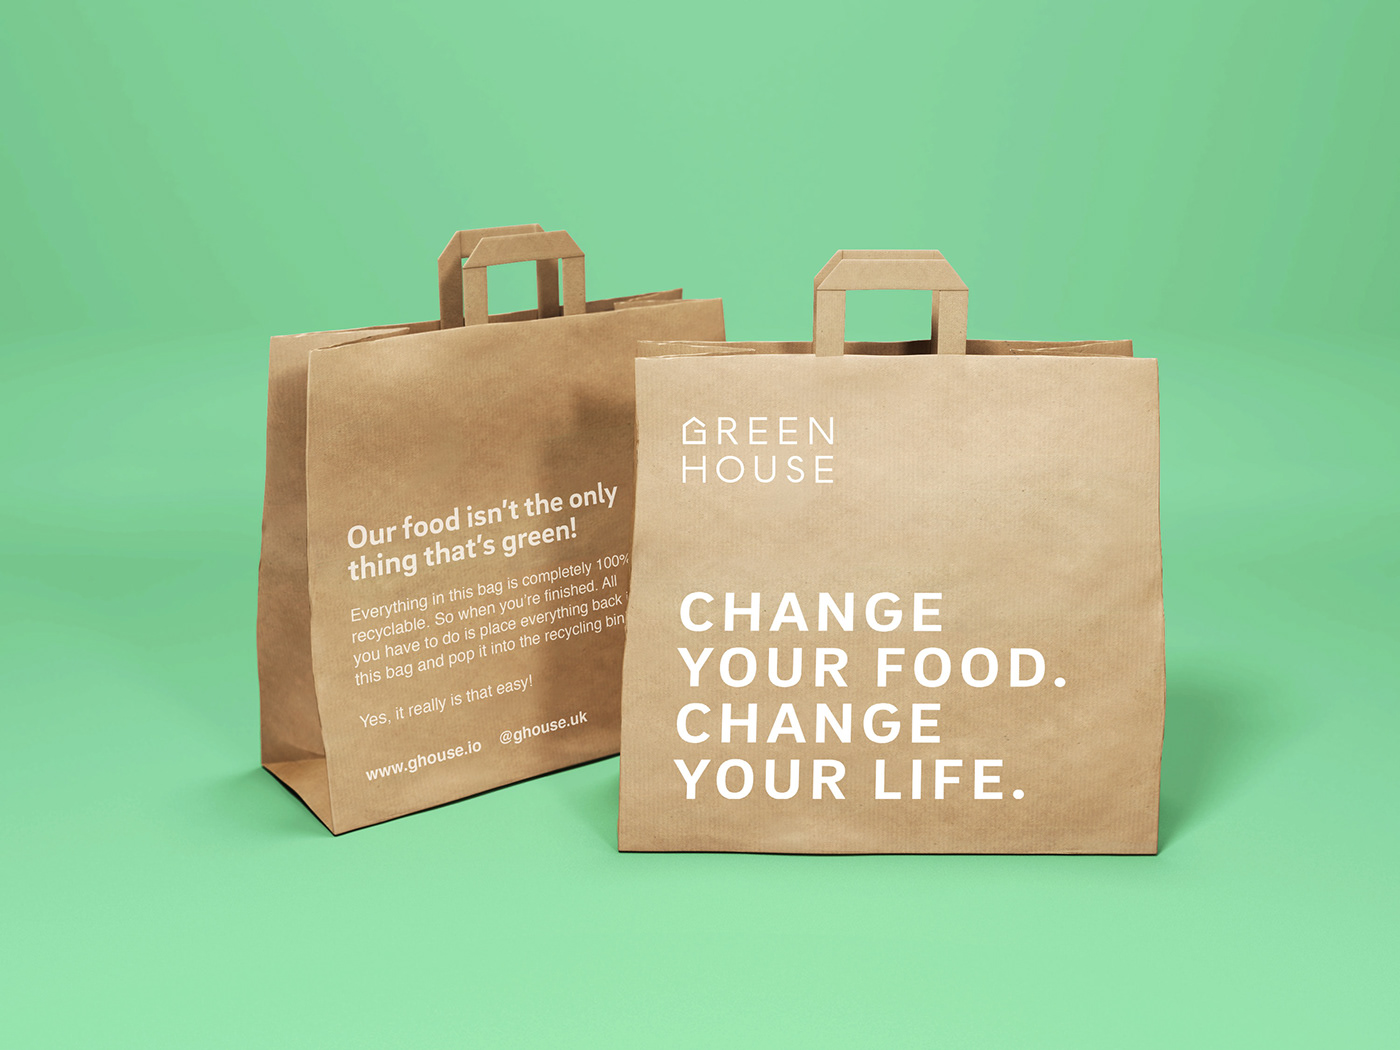 Packaging salad restaurant takeout healthyfood branding  Food  Sustainable wellbeing